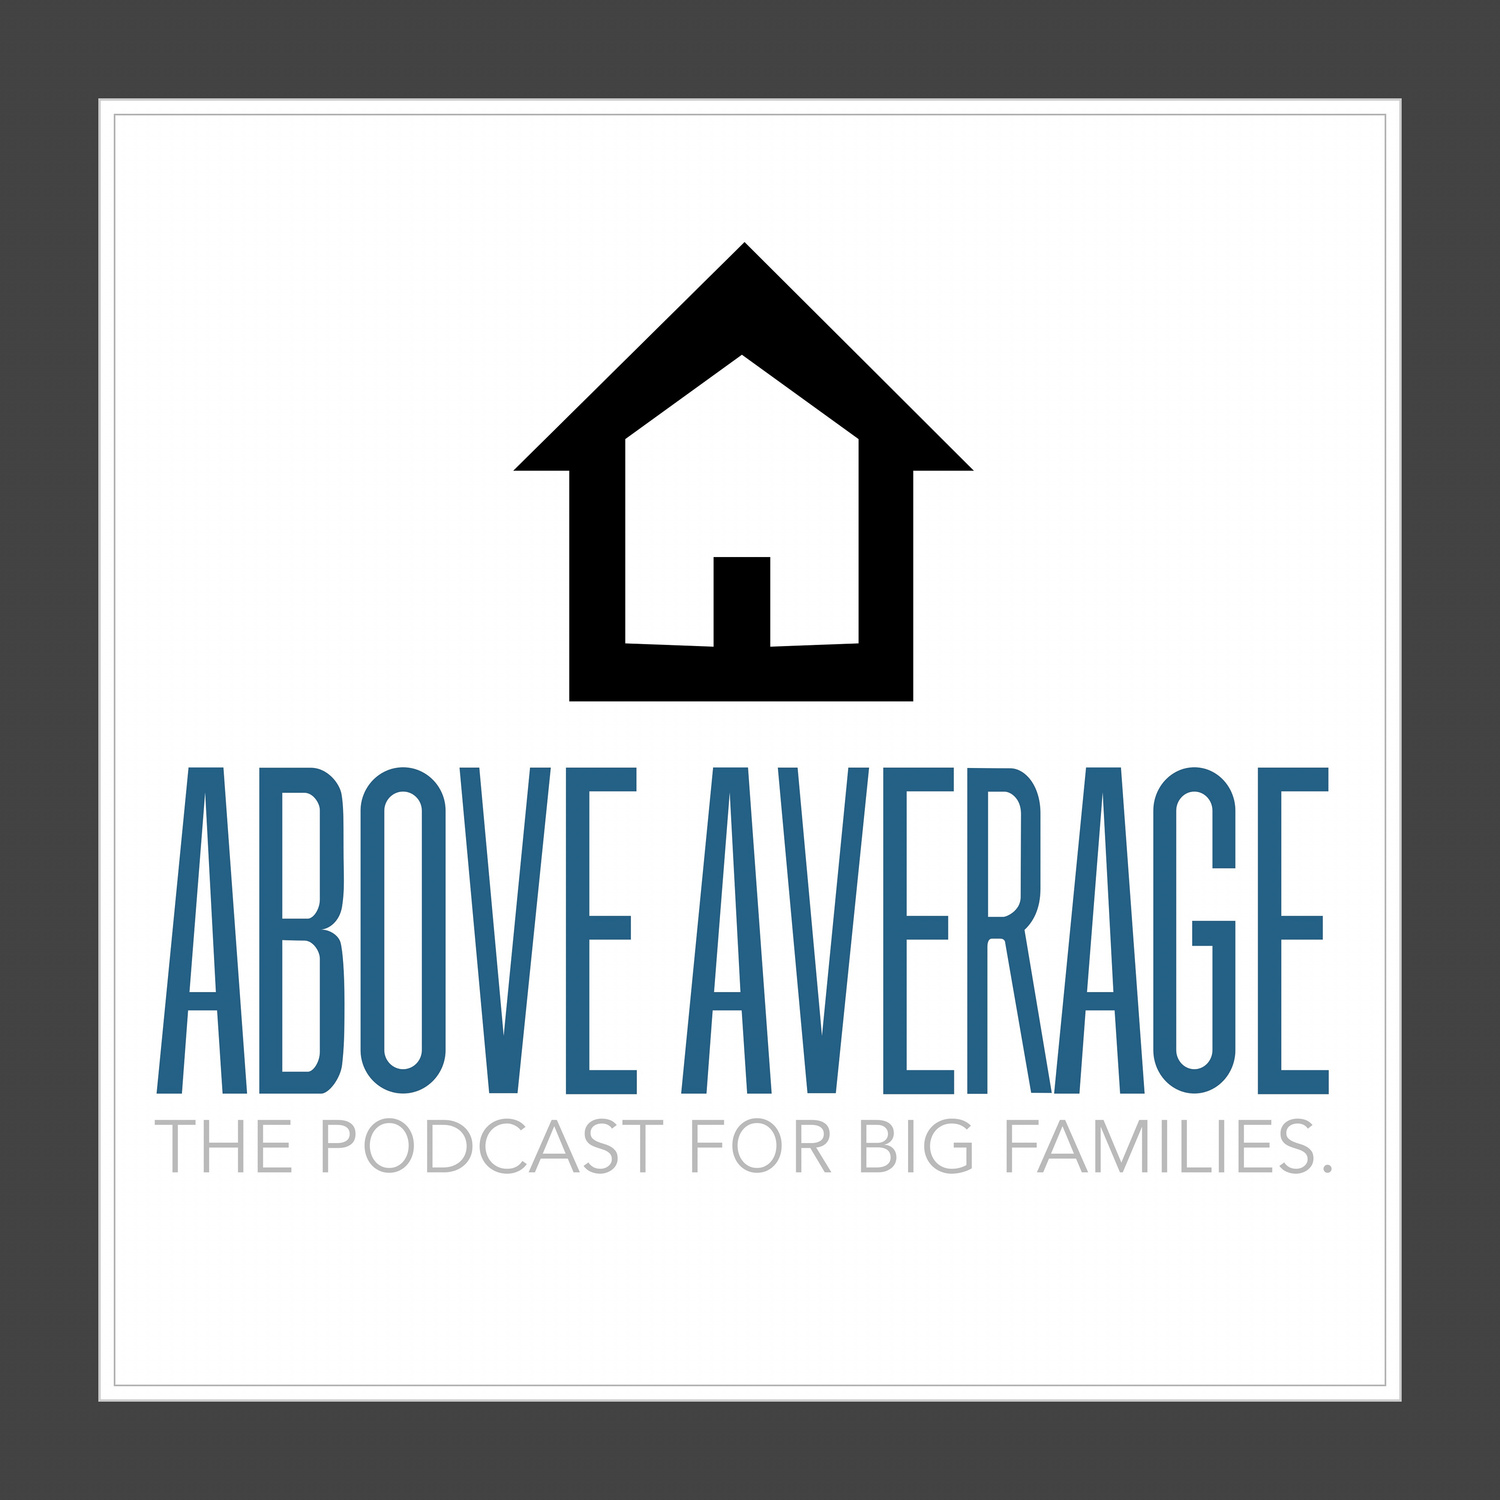 Above Average: The podcast for big families.